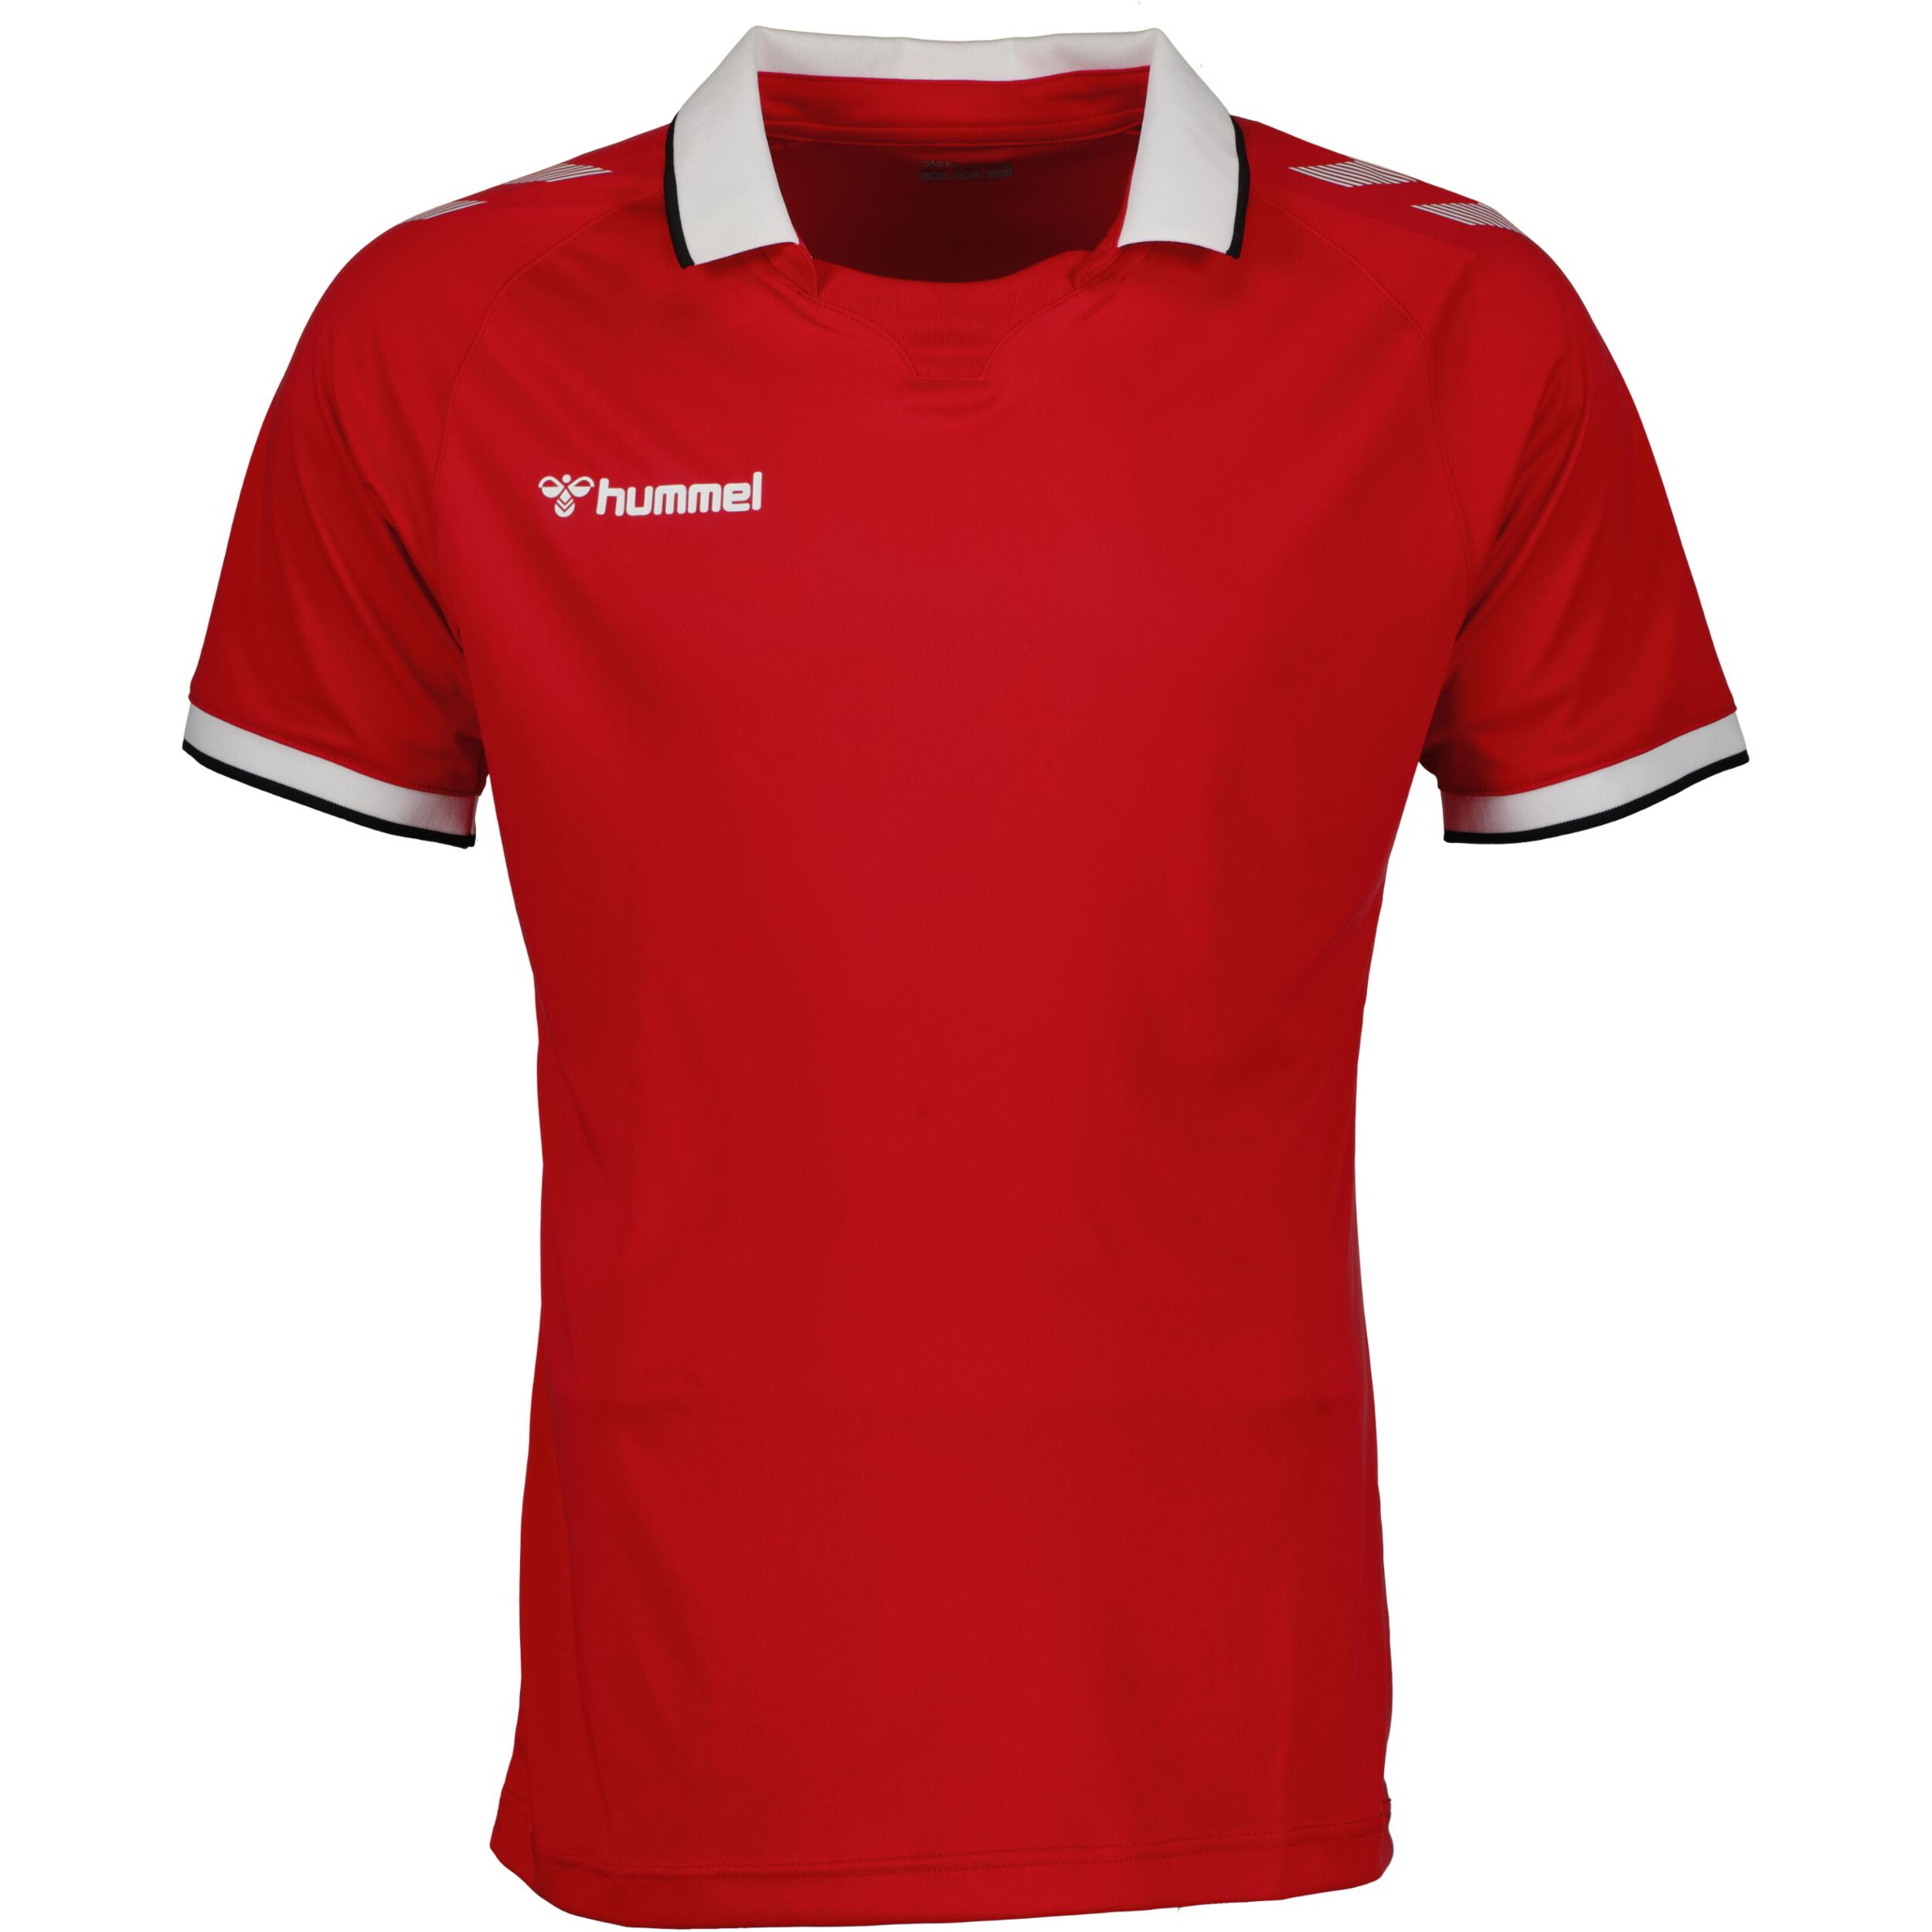 HUMMEL Impact jersey for juniors, great for football, in red/white